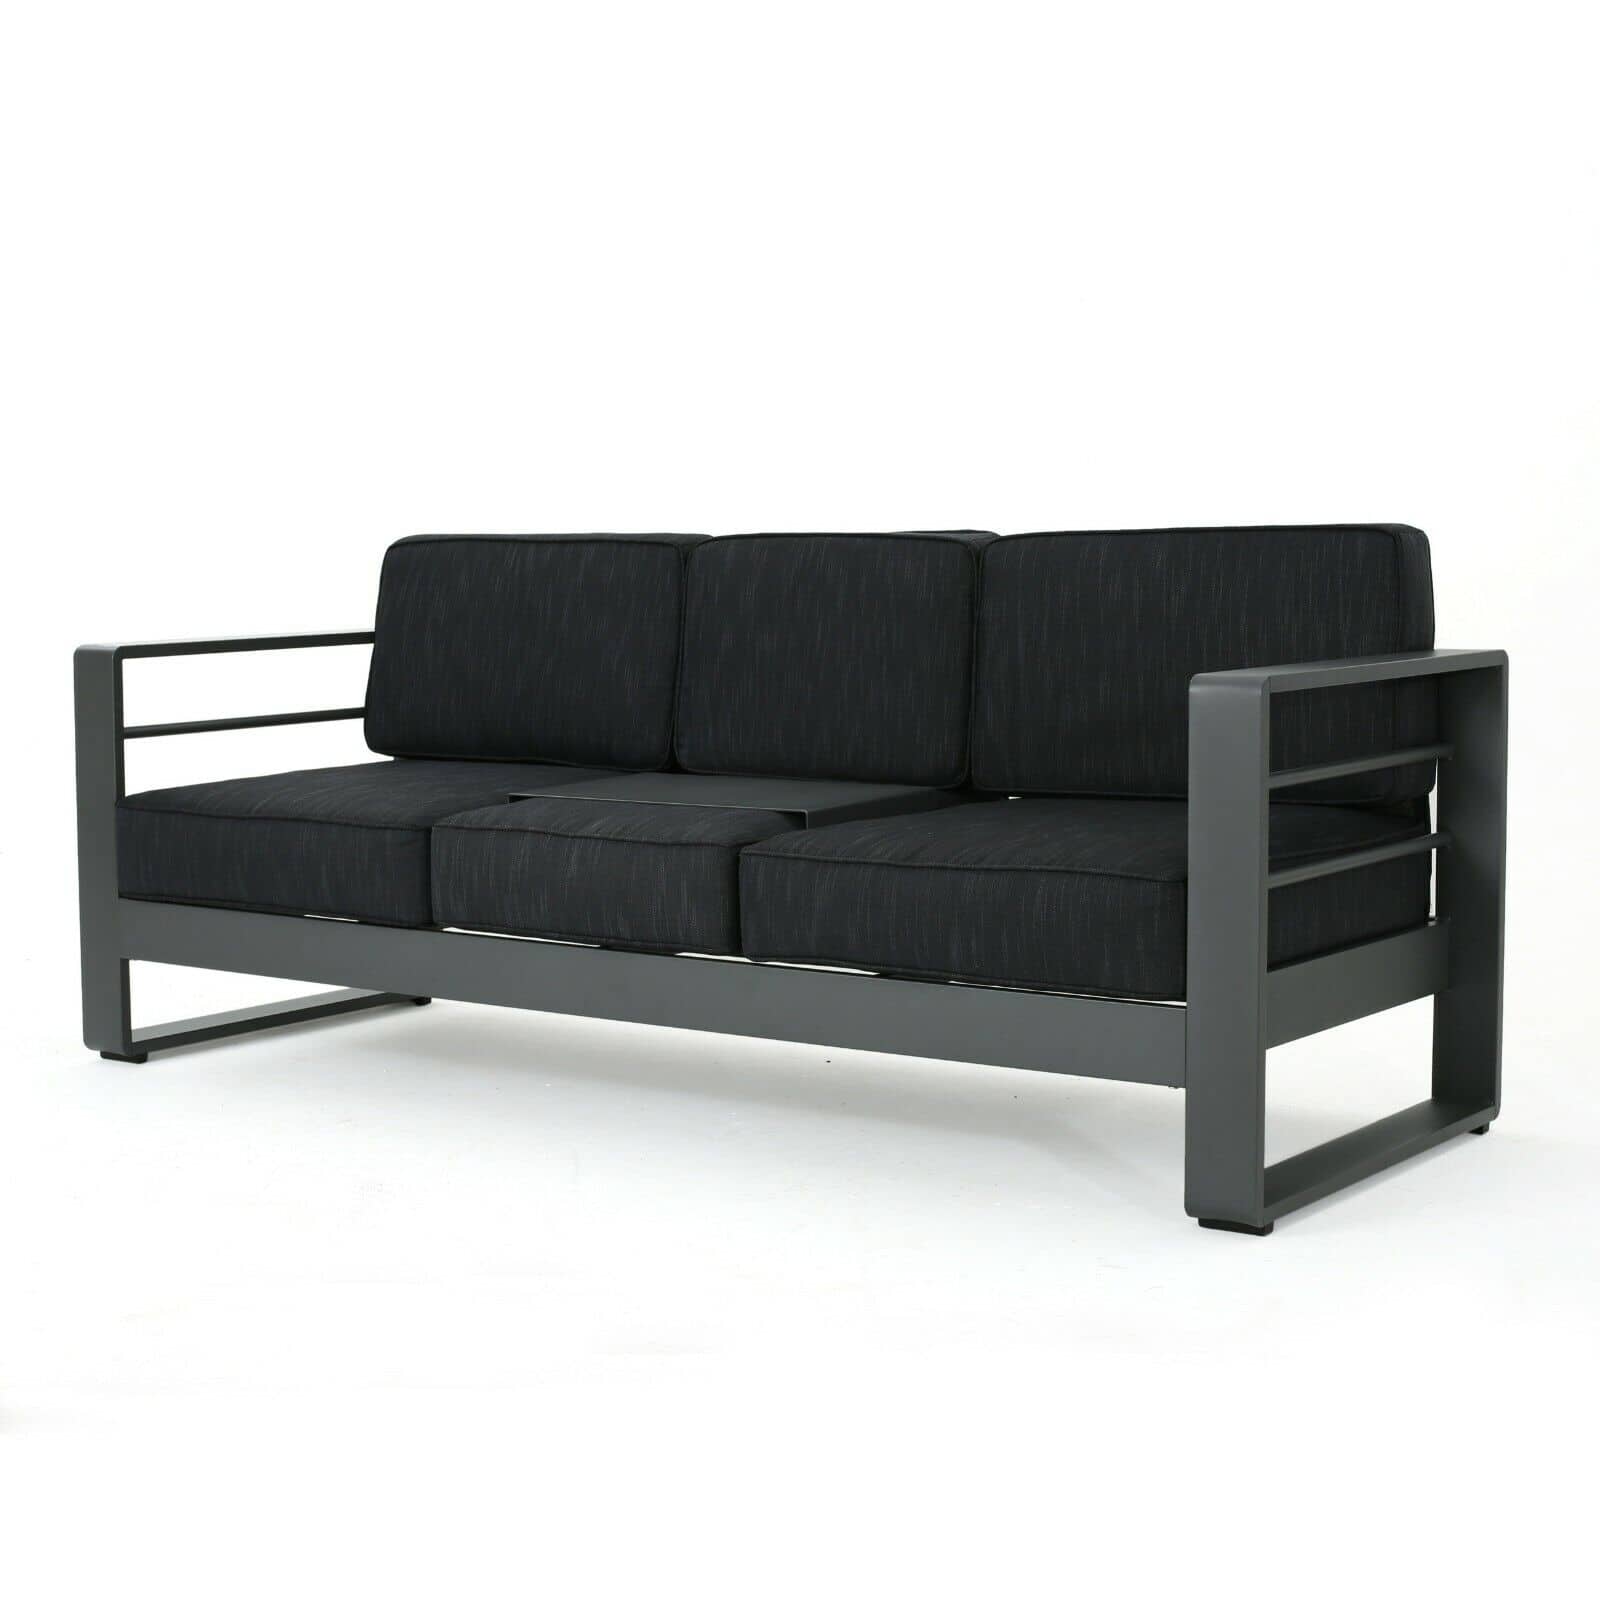 A black sofa with black cushions on a white background.